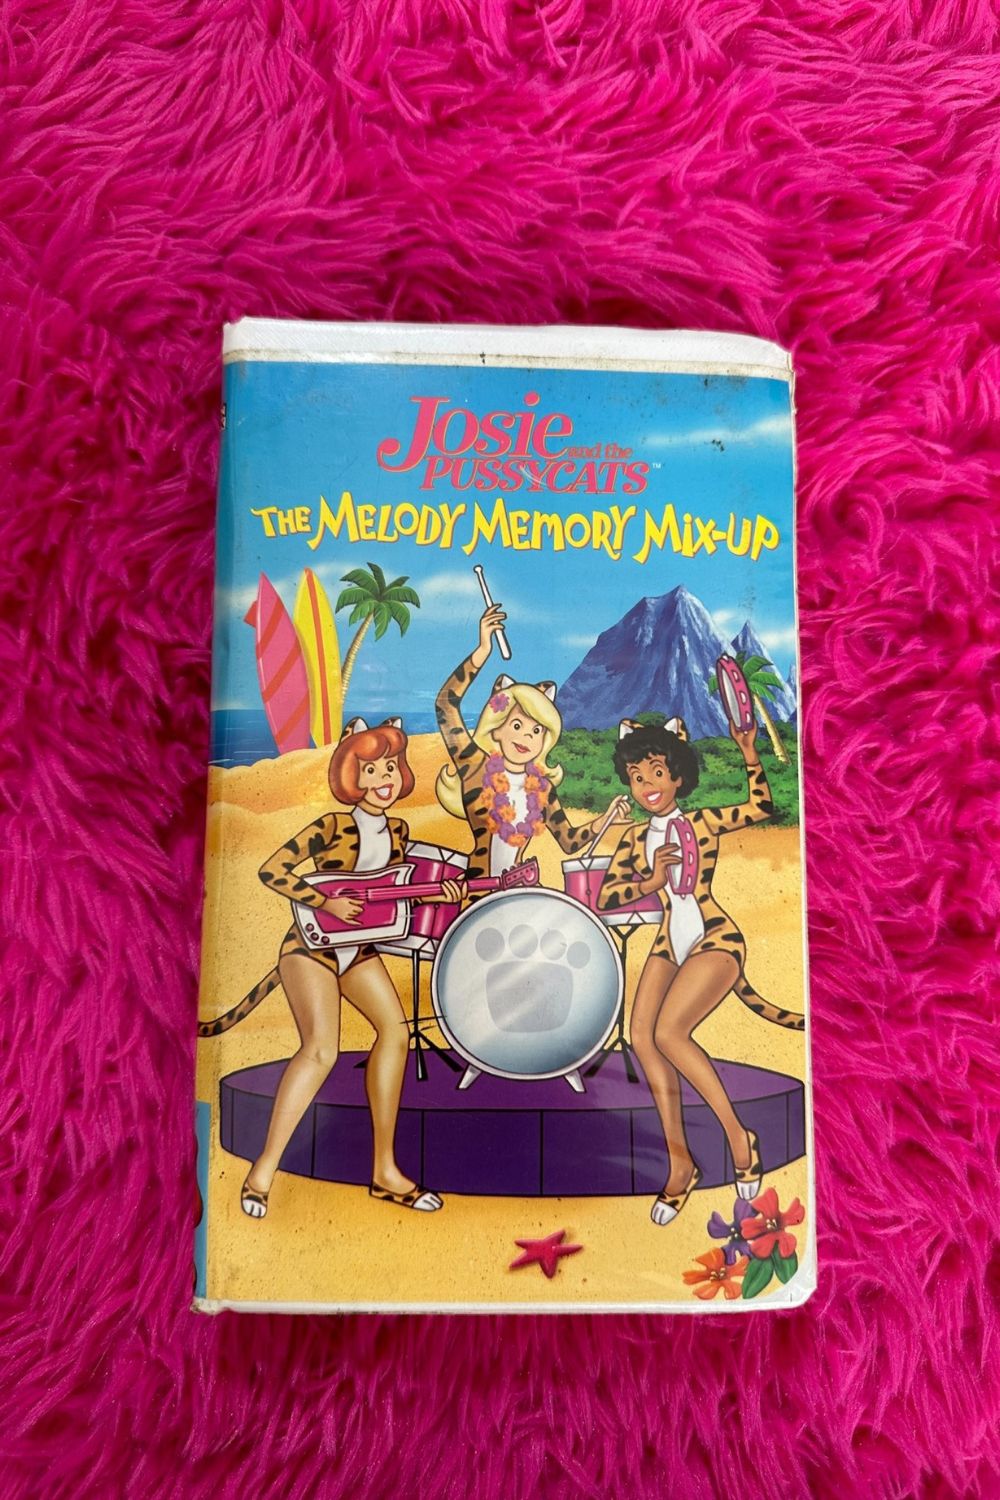 JOSIE AND THE PUSSYCATS: THE MELODY MEMORY MIX-UP VHS*